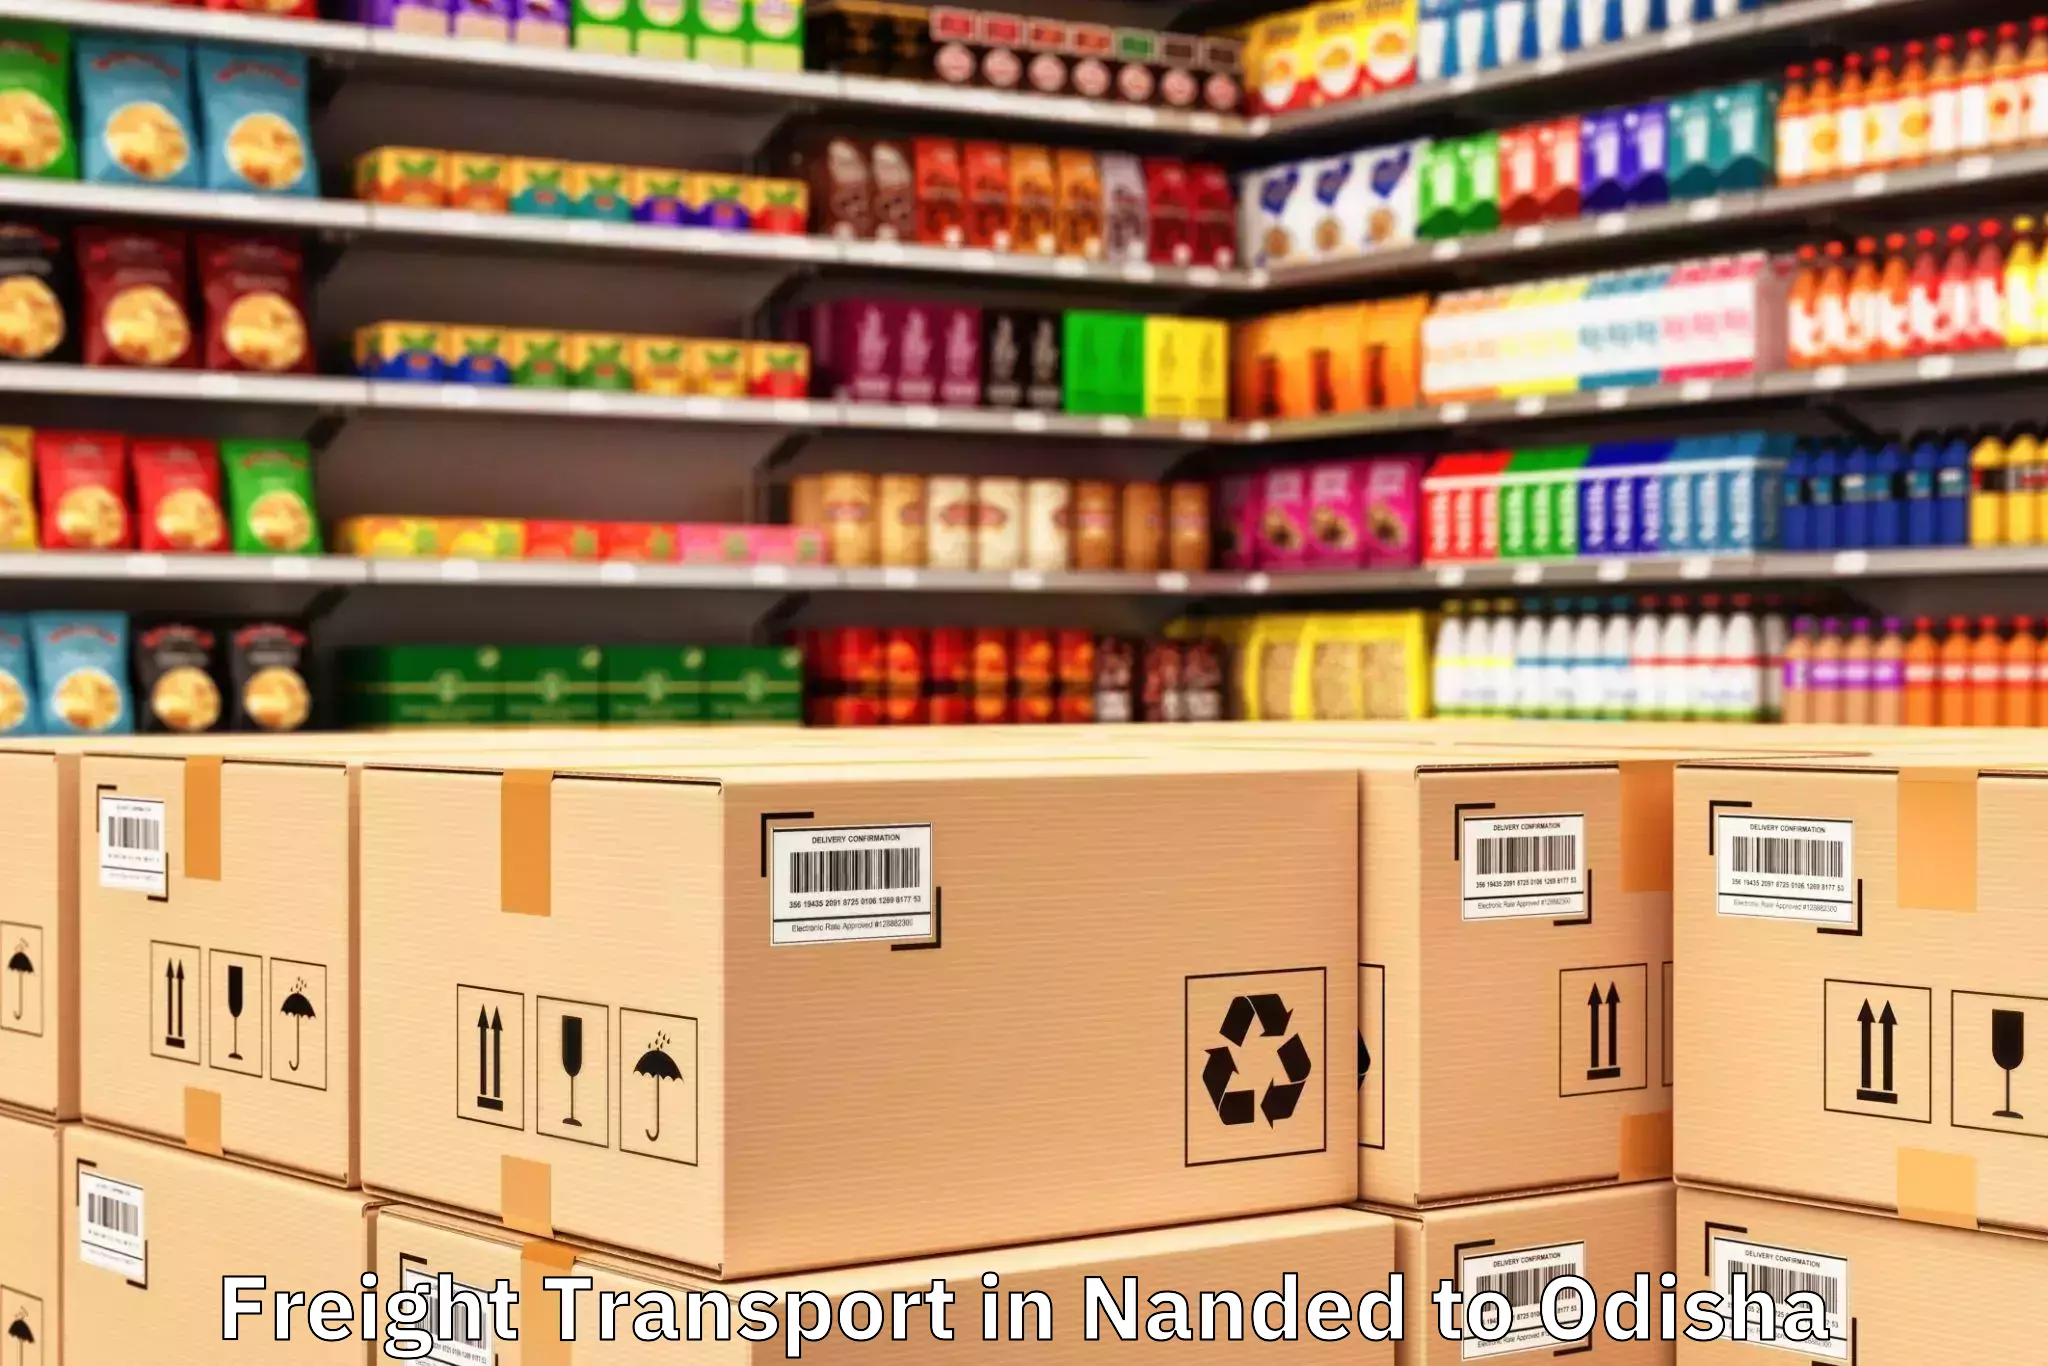 Efficient Nanded to Belpara Freight Transport